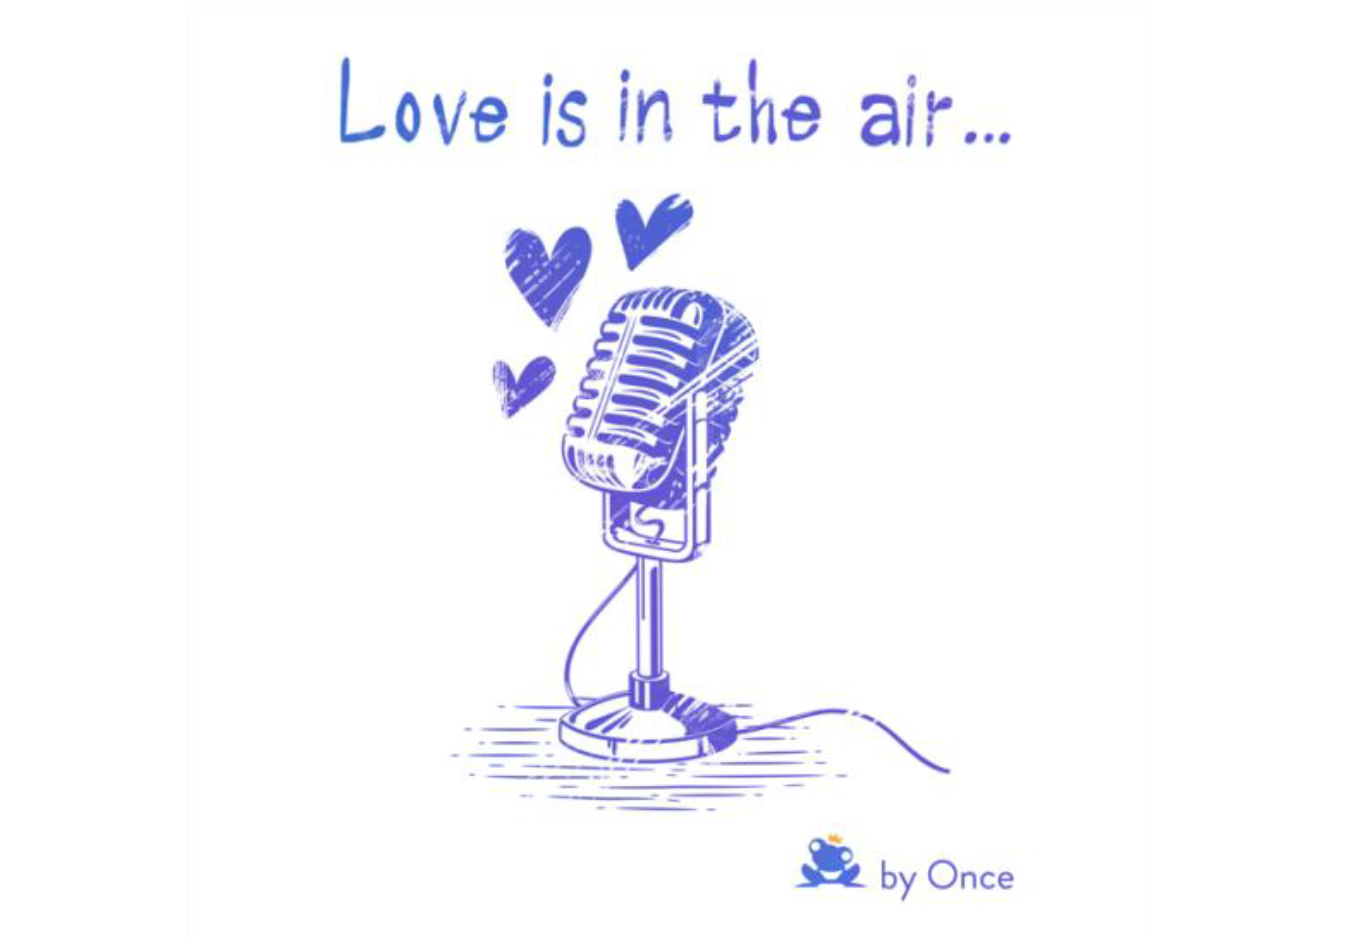 Podcast : des histoires d’amour digitales dans "Love is in the air"